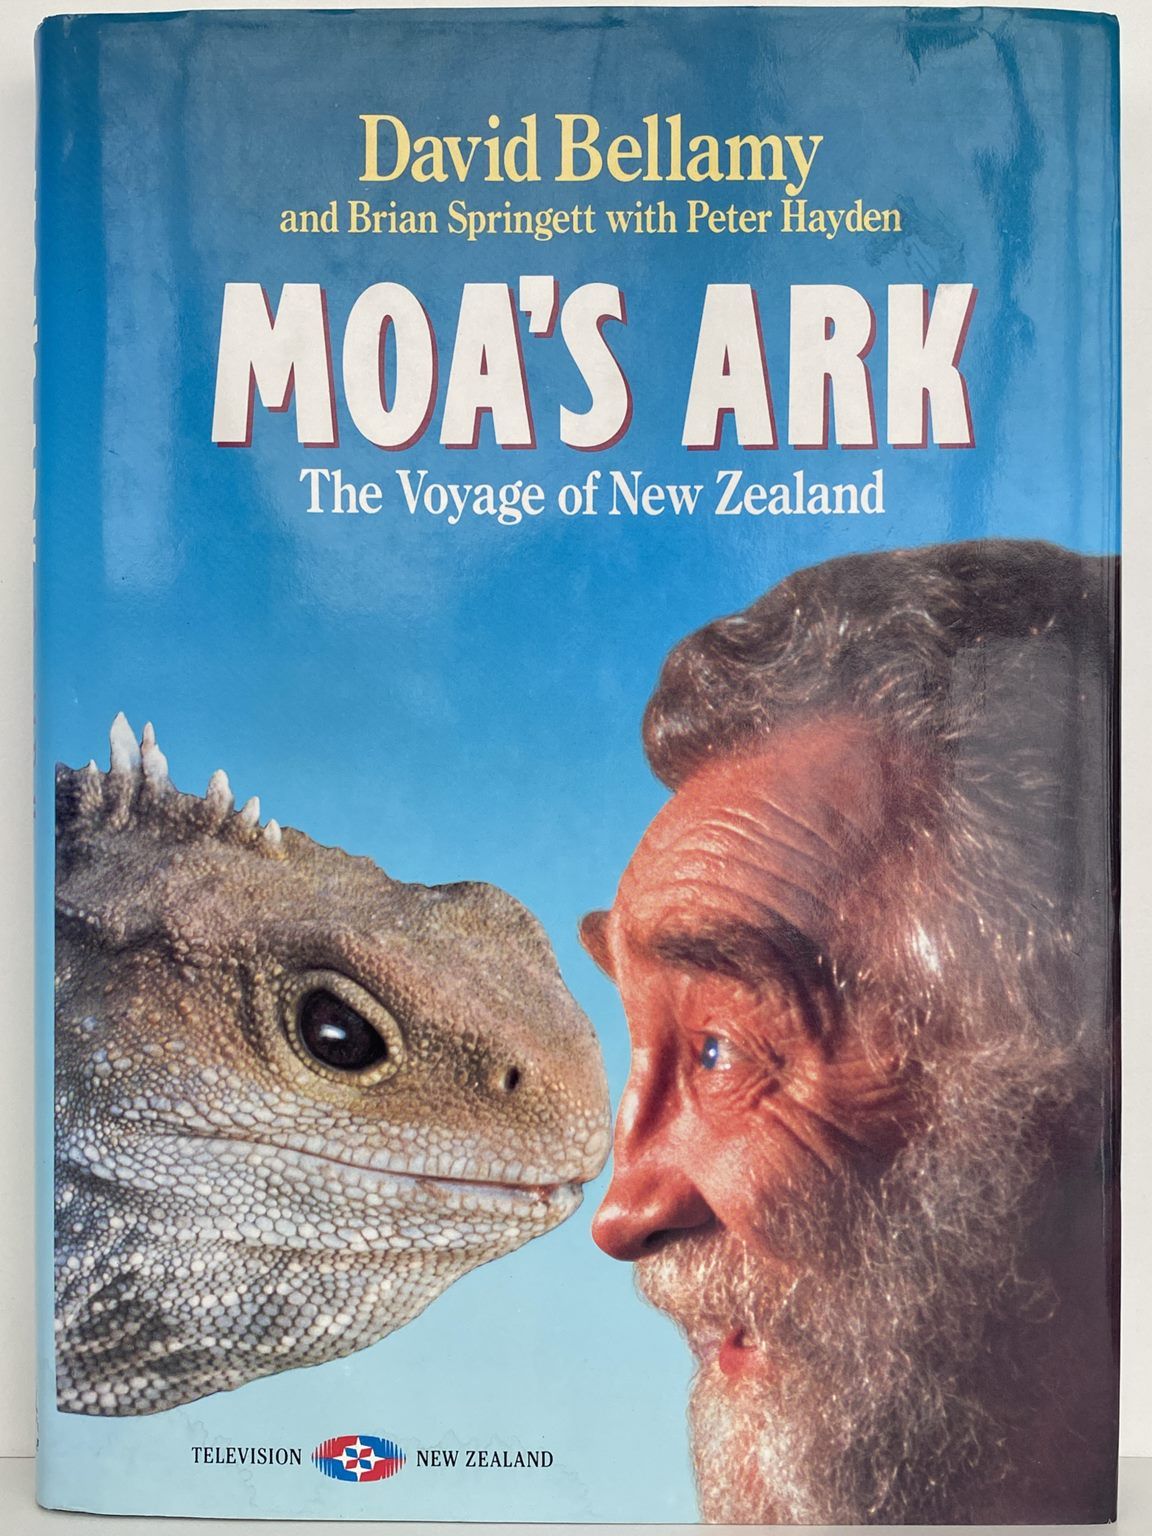 MOA'S ARK: The Voyage of New Zealand